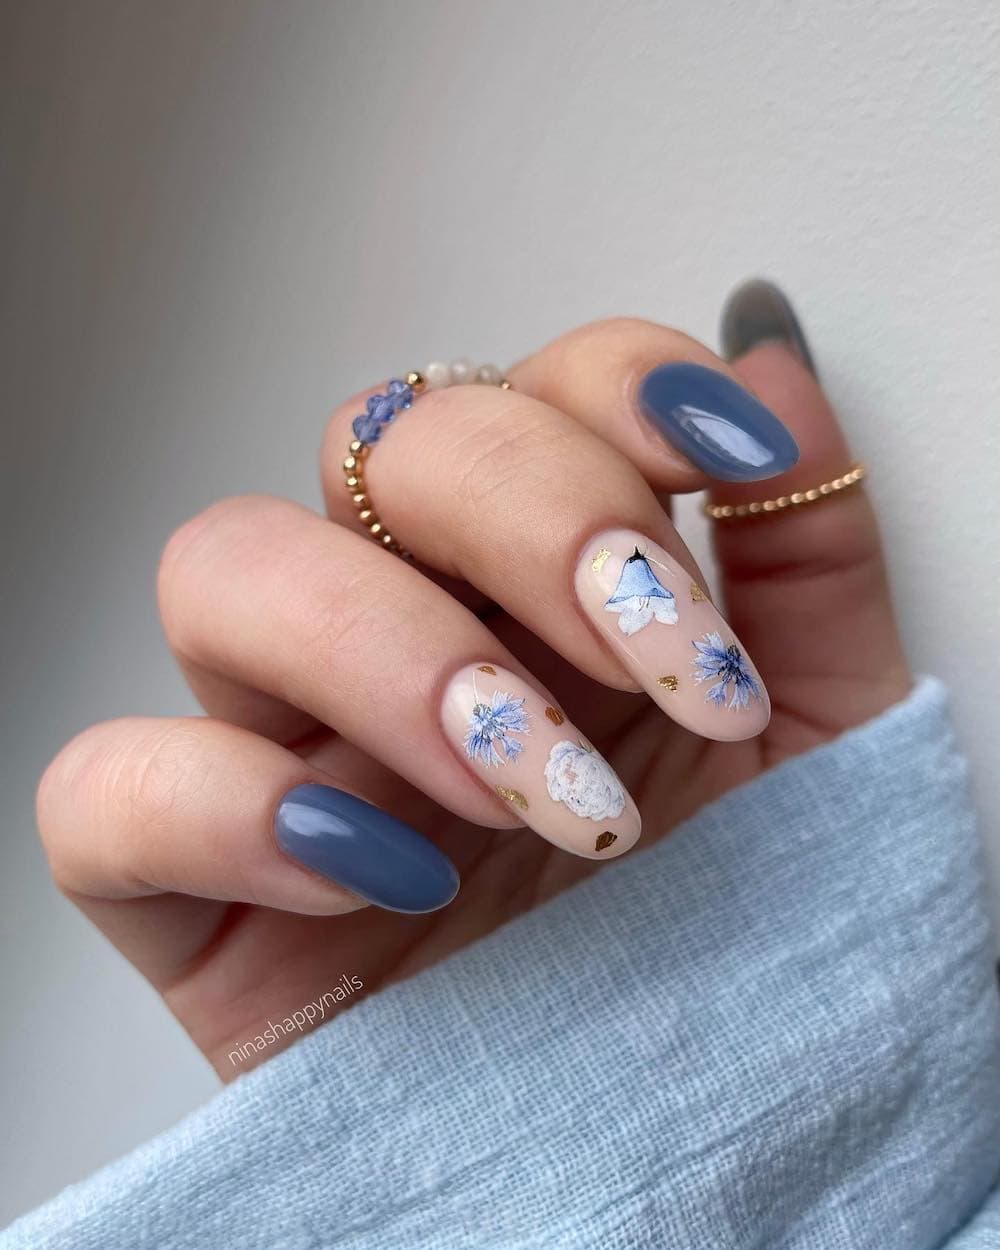 A hand with medium round nails painted a moody blue with nude accent nails featuring blue floral art